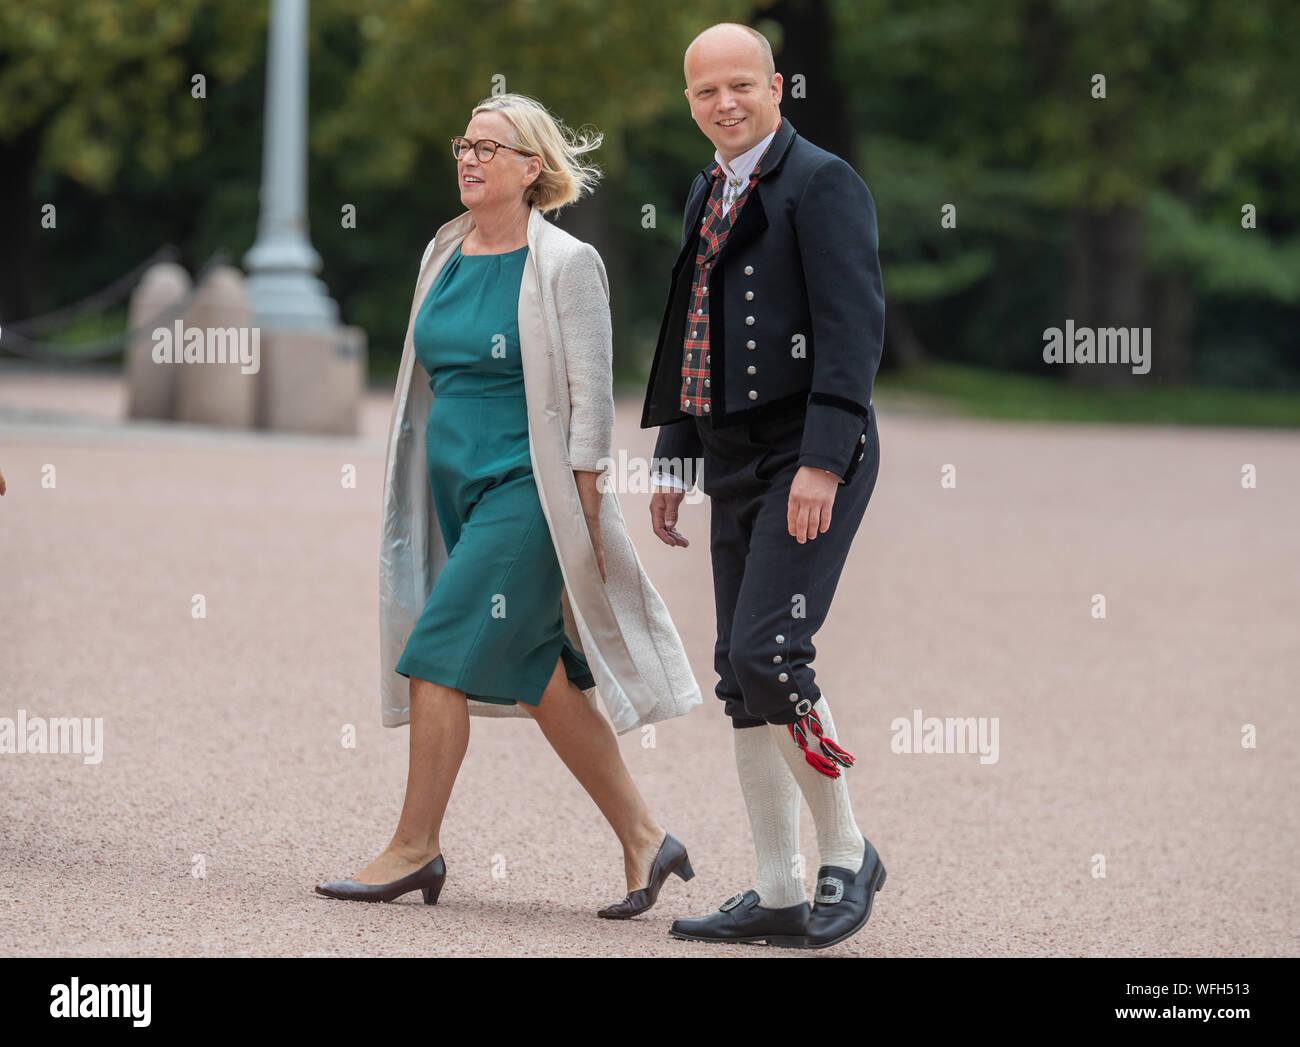 Politician Trygve Slagsvold Vedum arriving for the confirmation of Princess Ingrid Alexandra of Norway at the Royal Palace Oslo, Norway  credit Nigel Stock Photo